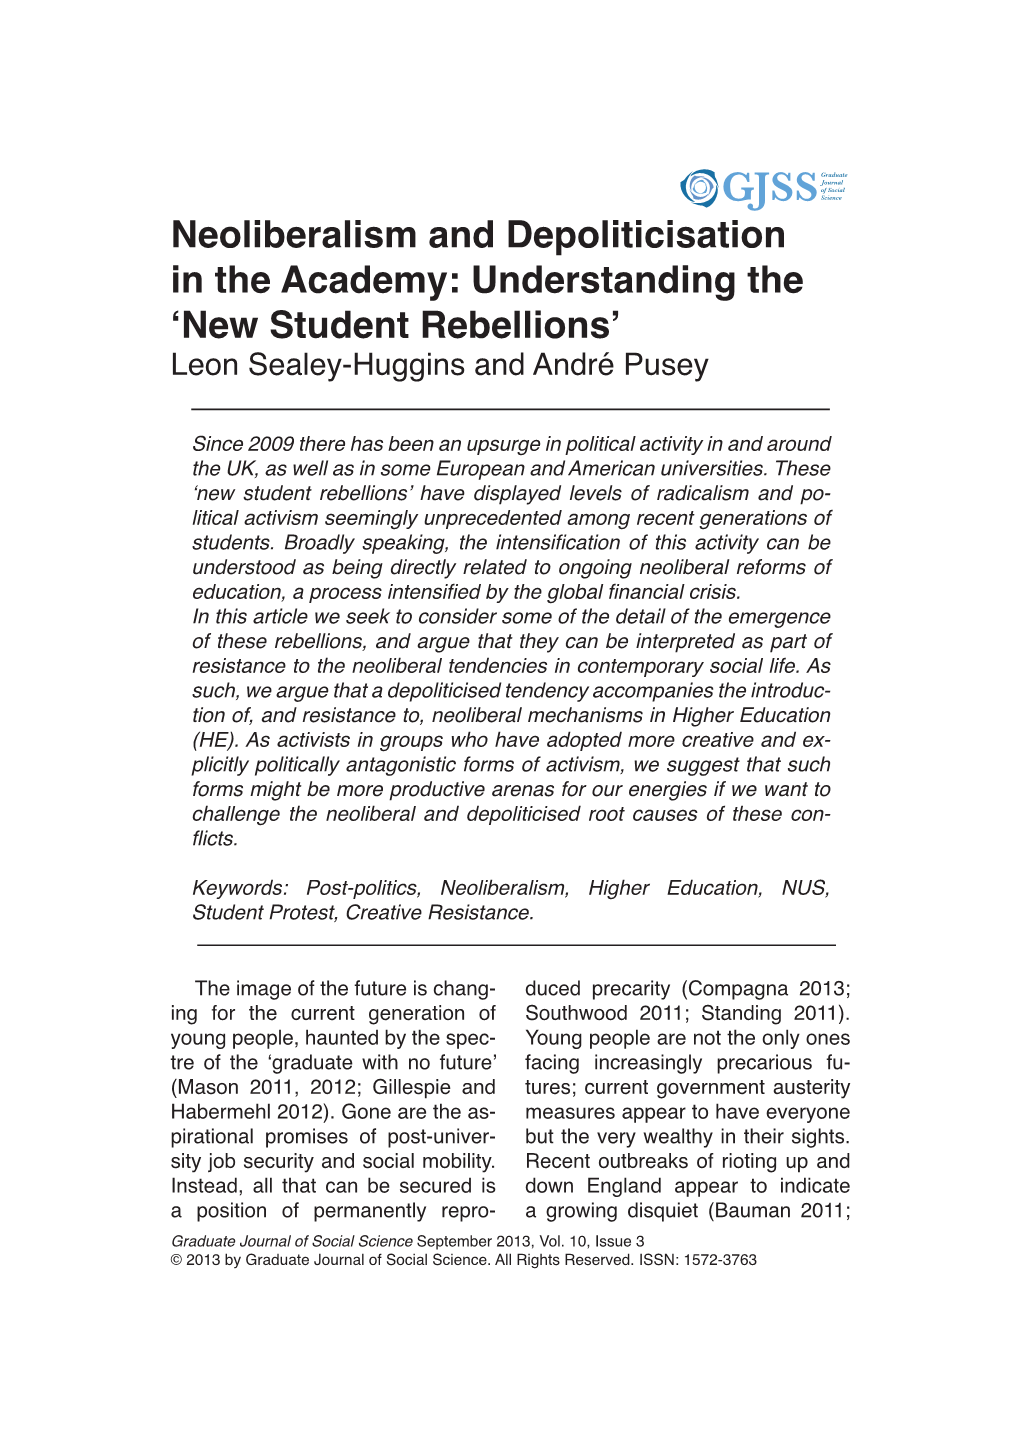 Neoliberalism and Depoliticisation in the Academy: Understanding the ‘New Student Rebellions’ Leon Sealey-Huggins and André Pusey